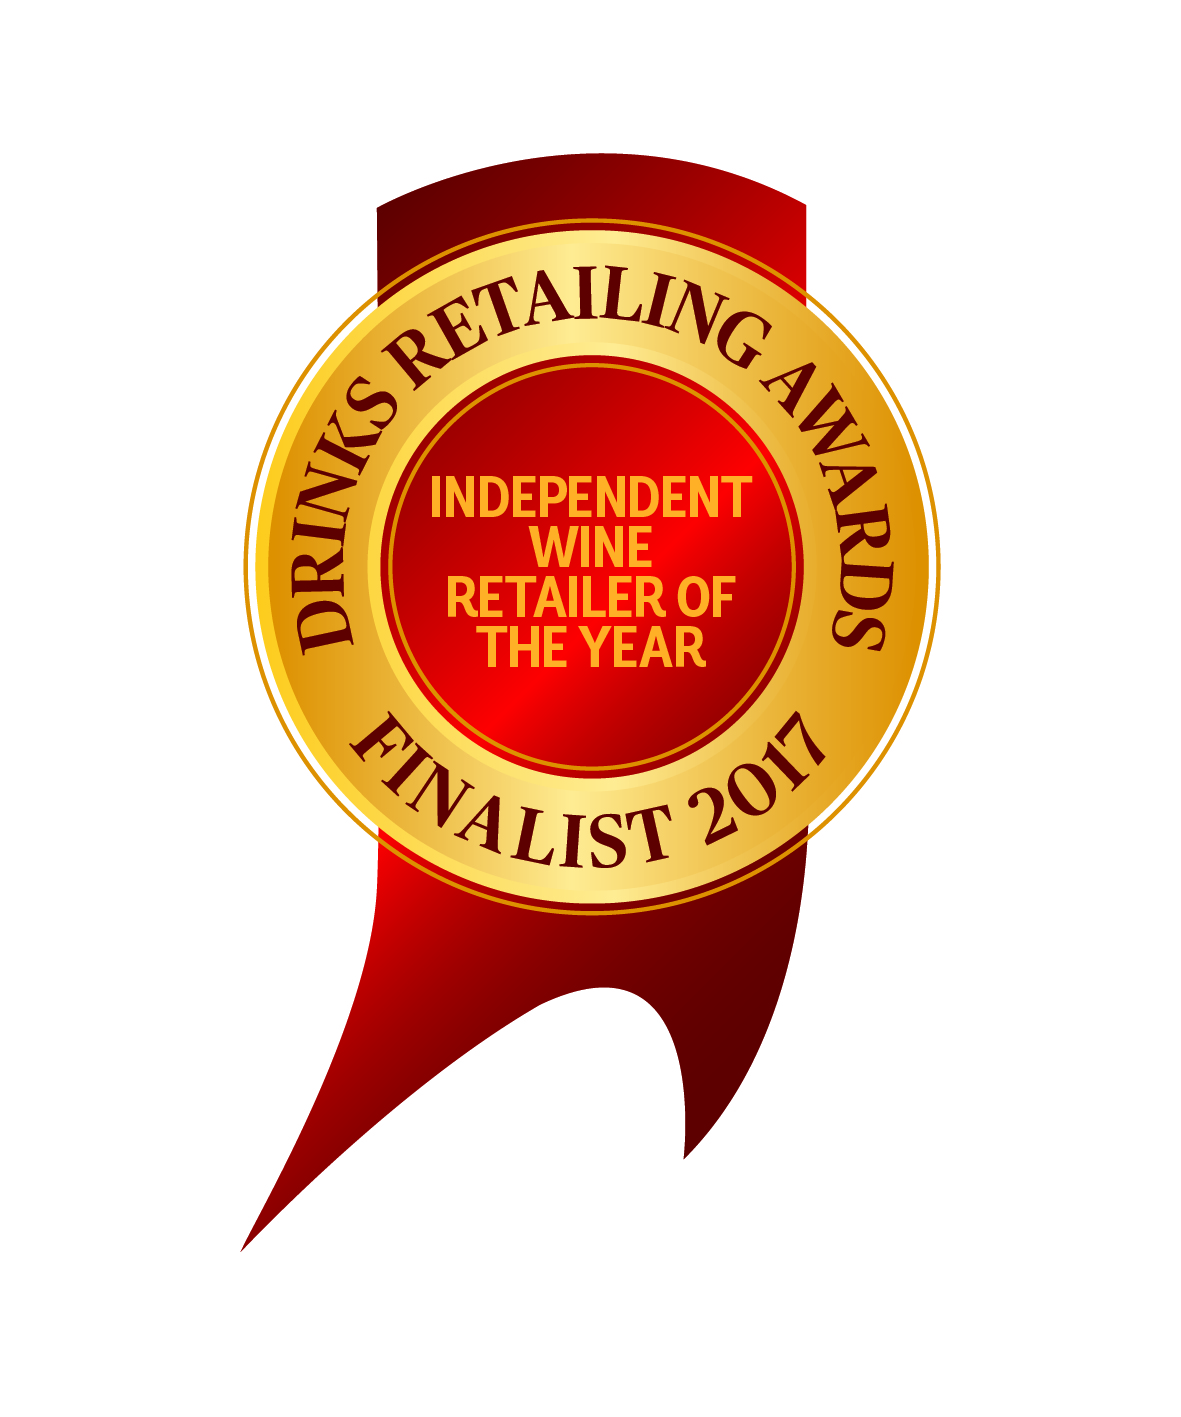 Finalist for Independent Wine Retailer of the Year at the Drinks Retailing Awards 2017